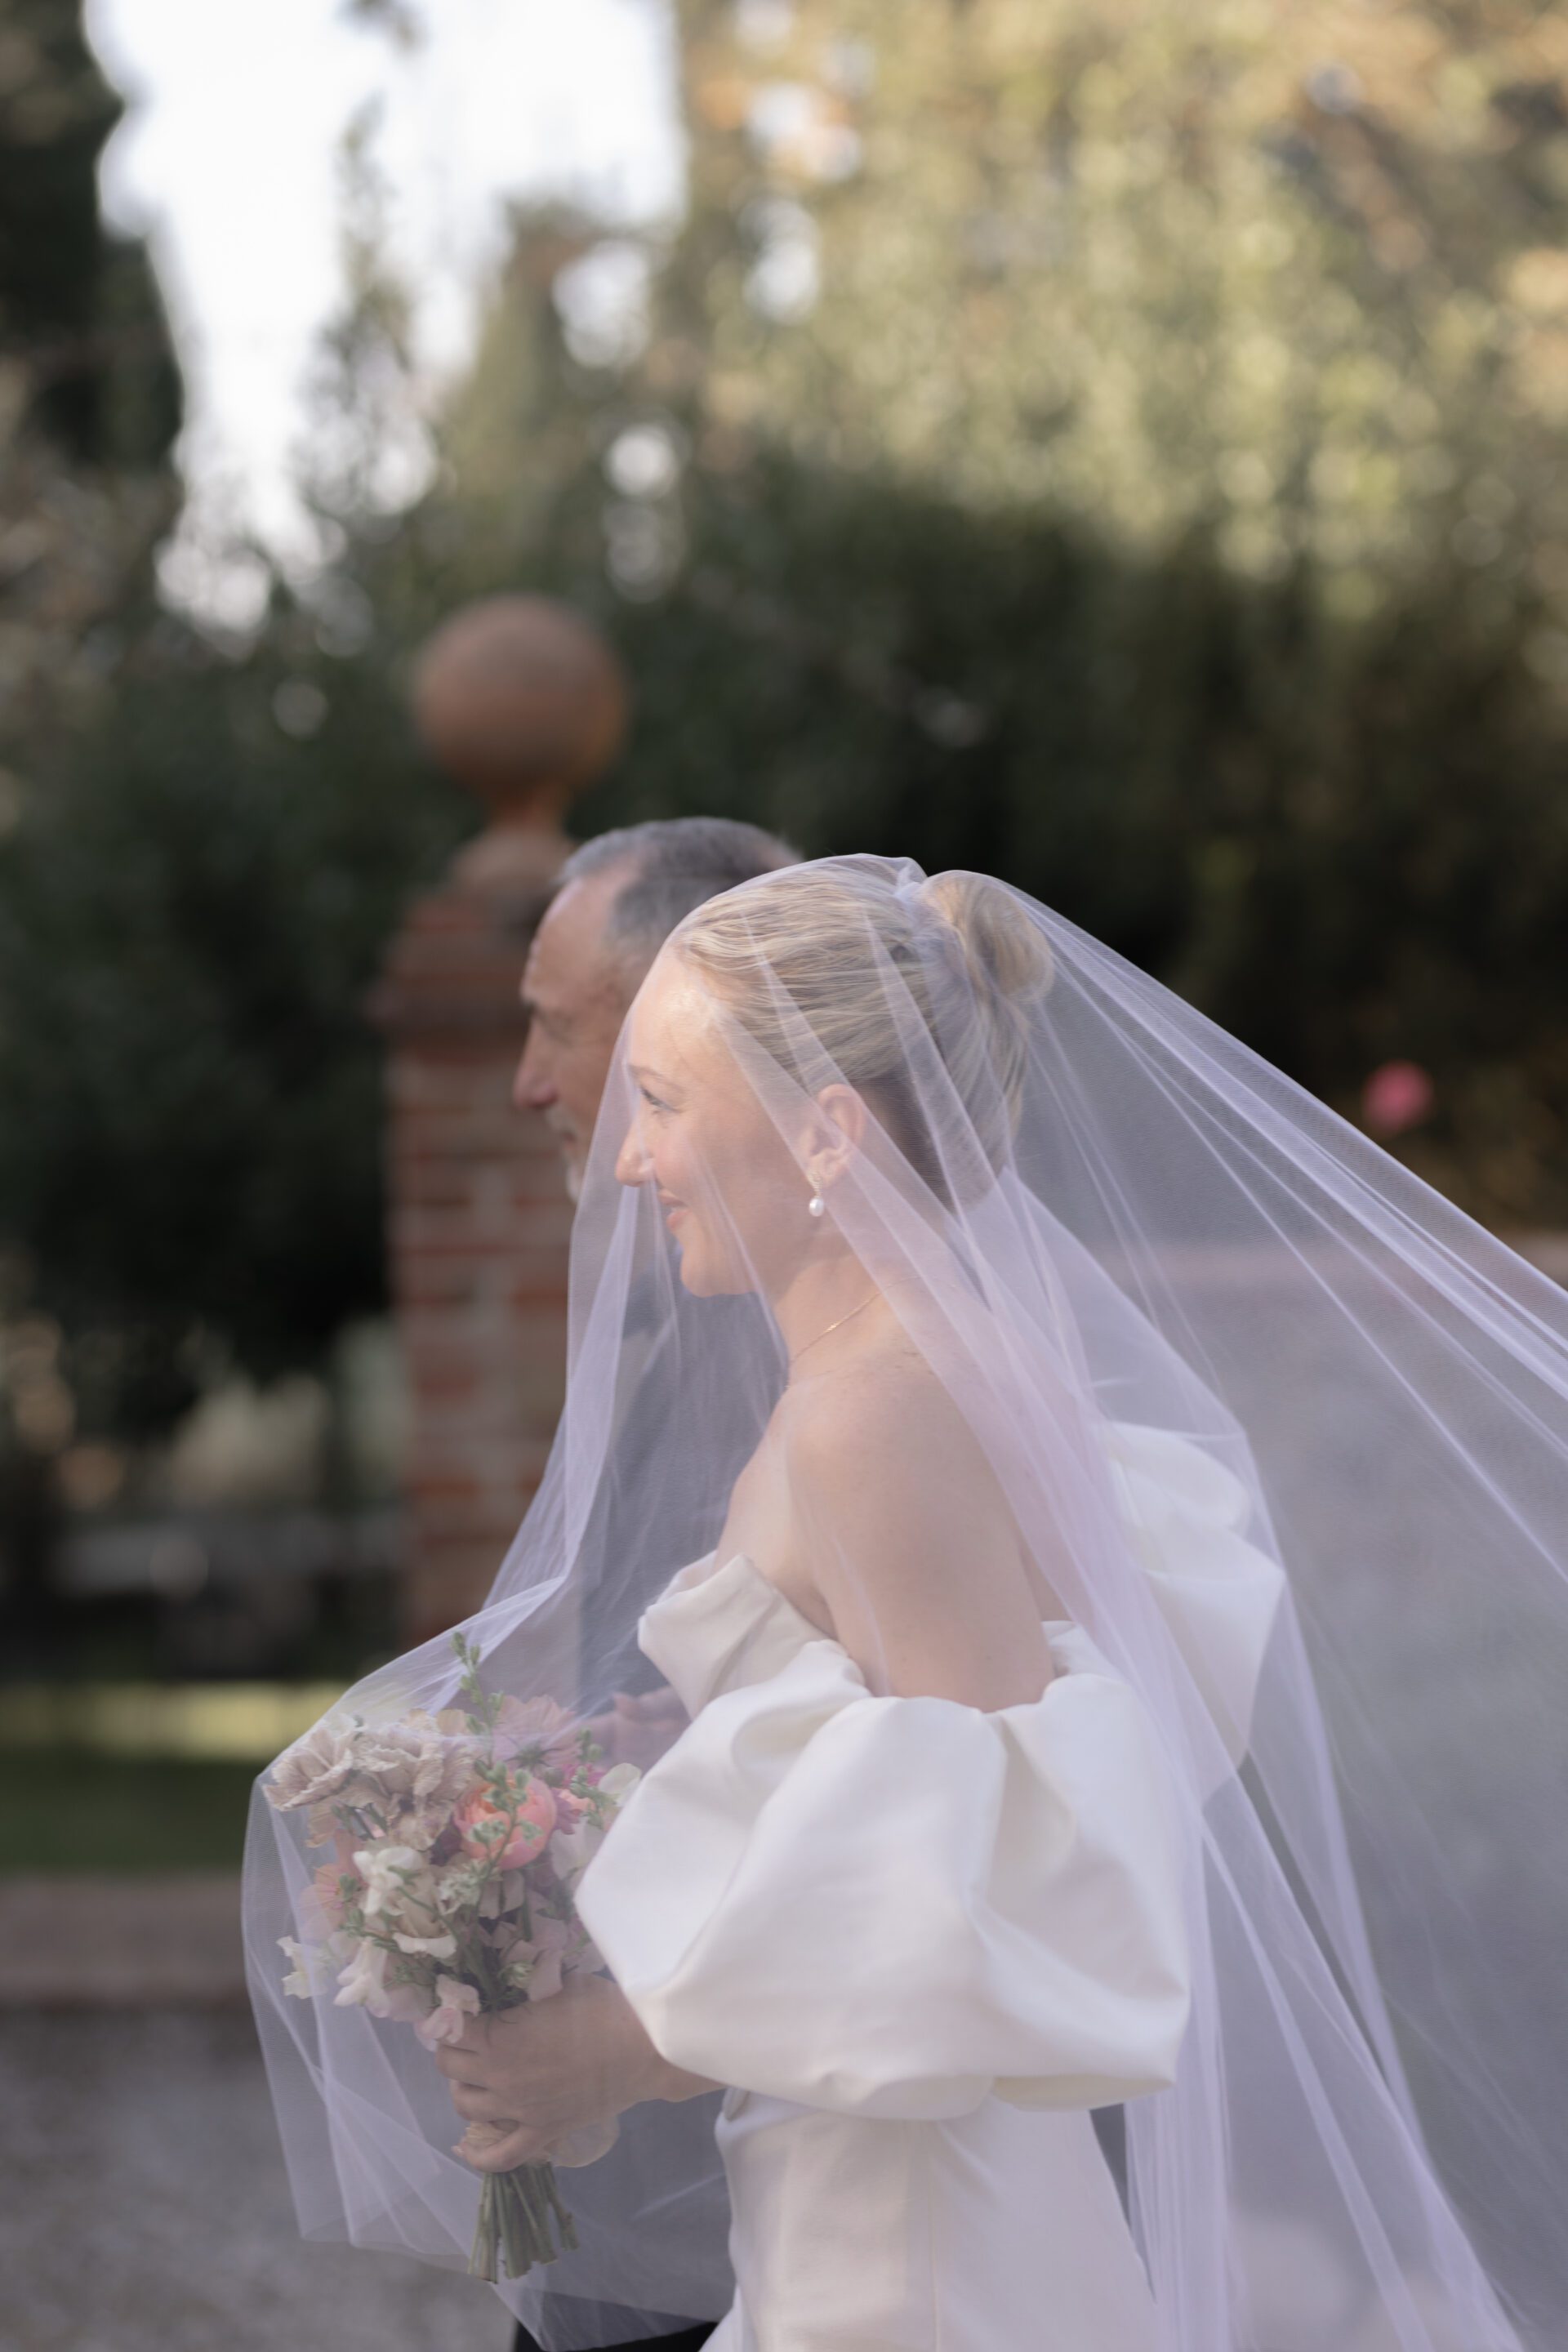 The bride makes her way down the aisle at her Tuscan wedding, captured with Italian wedding photography